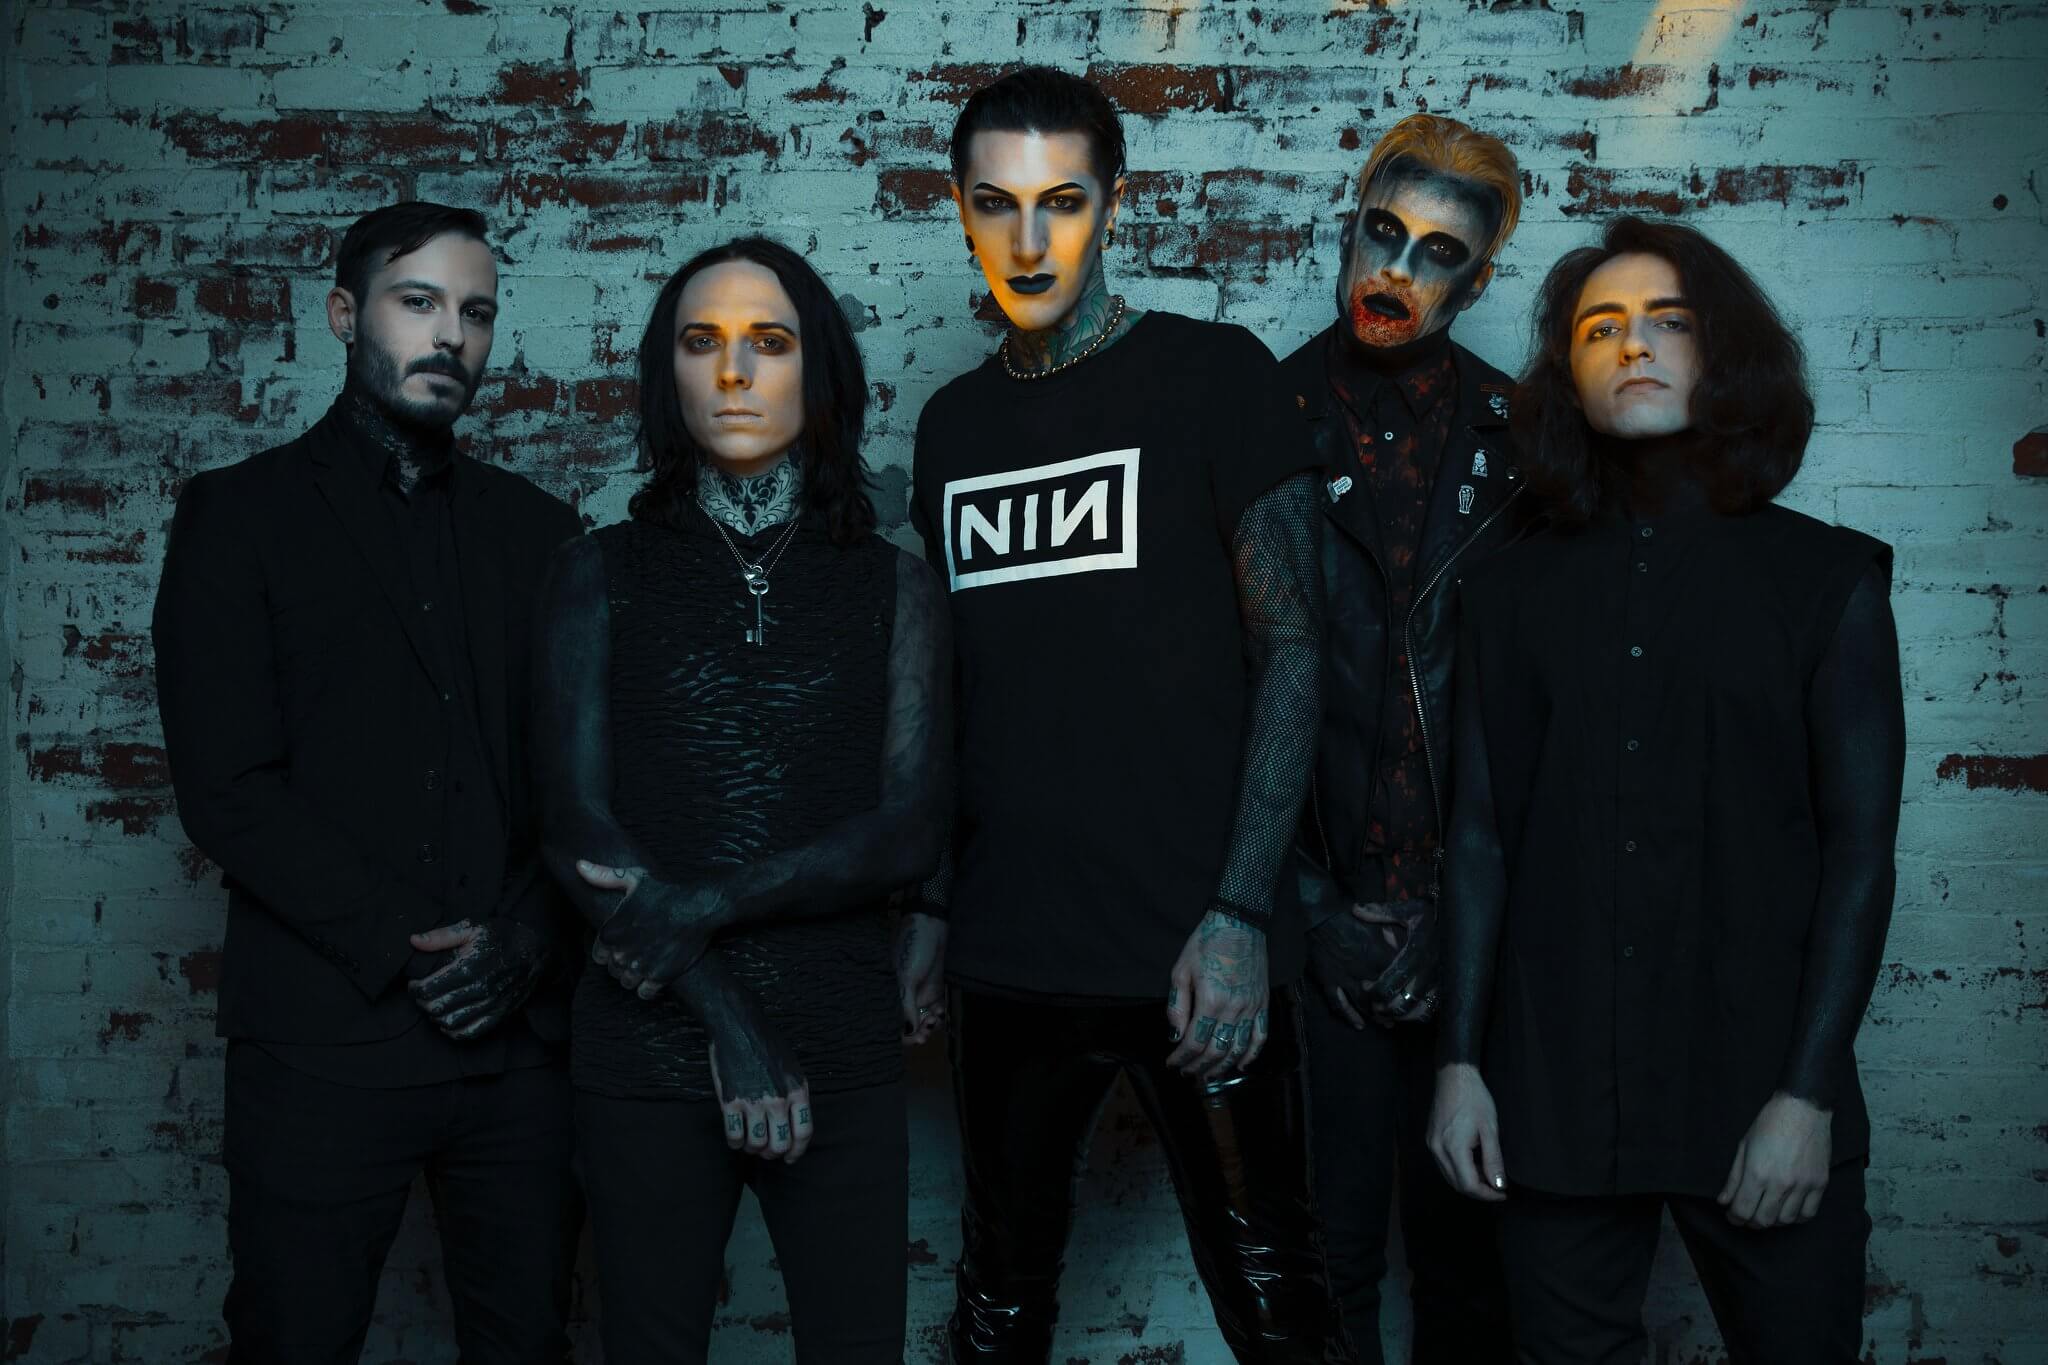 MOTIONLESS IN WHITE TO PERFORM ‘CREATURES’ ALBUM LIVESTREAM + ANNOUNCE ‘CREATURES’ 10TH ANNIVERSARY RE-ISSUE